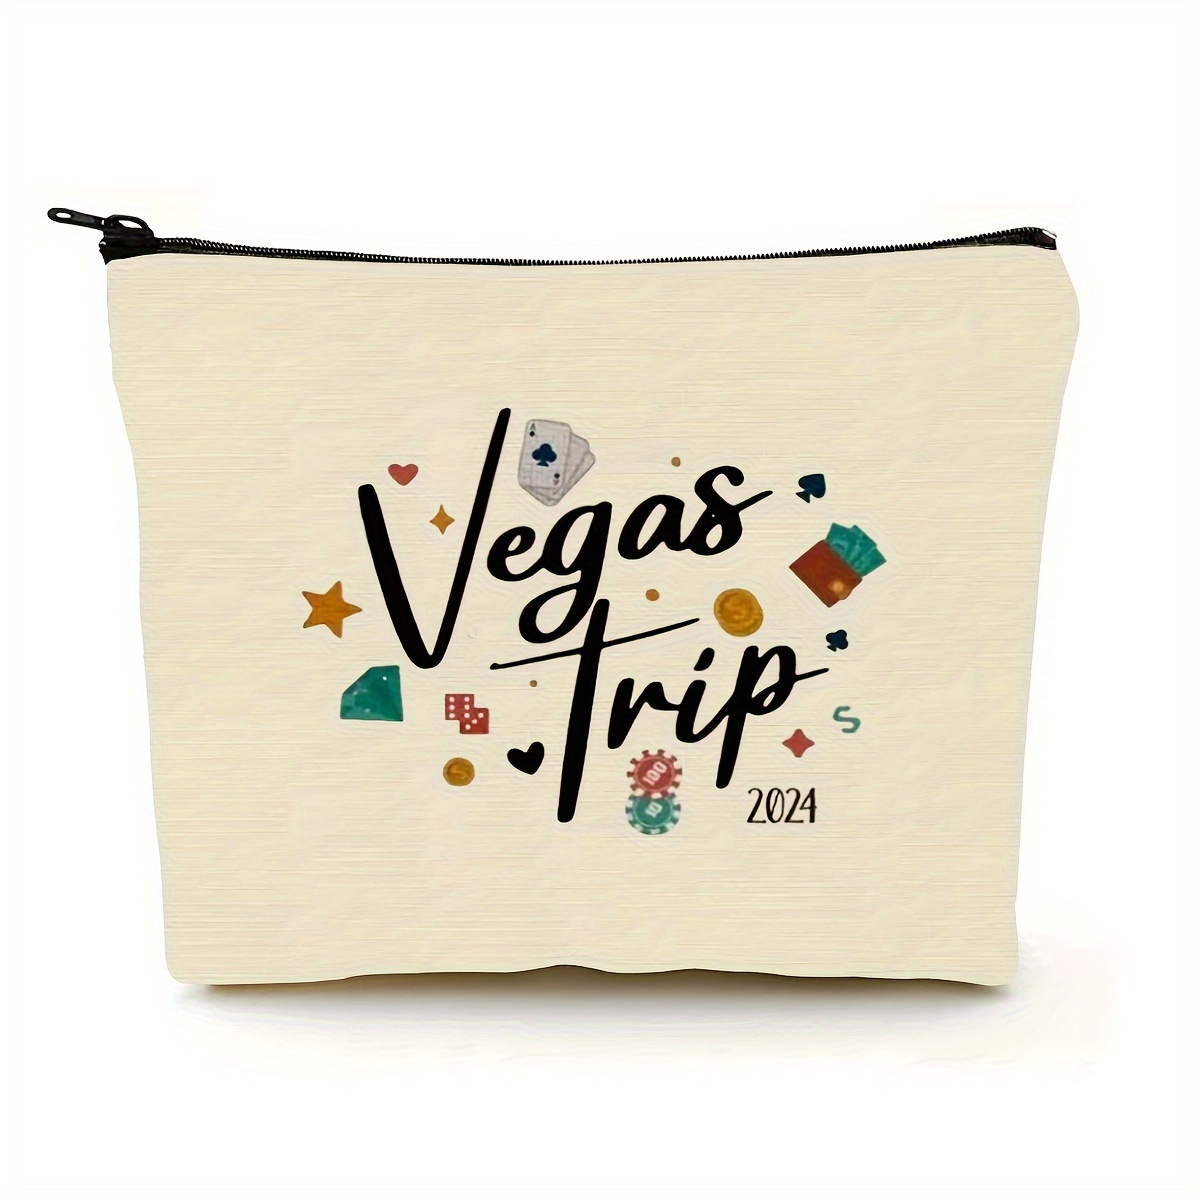 

1pc Las Vegas Themed Makeup Pouch - Multi-use Cosmetic Bag For Toiletries And Stationery, Cute Travel Accessory & Ideal Gift, Durable With Zip Closure